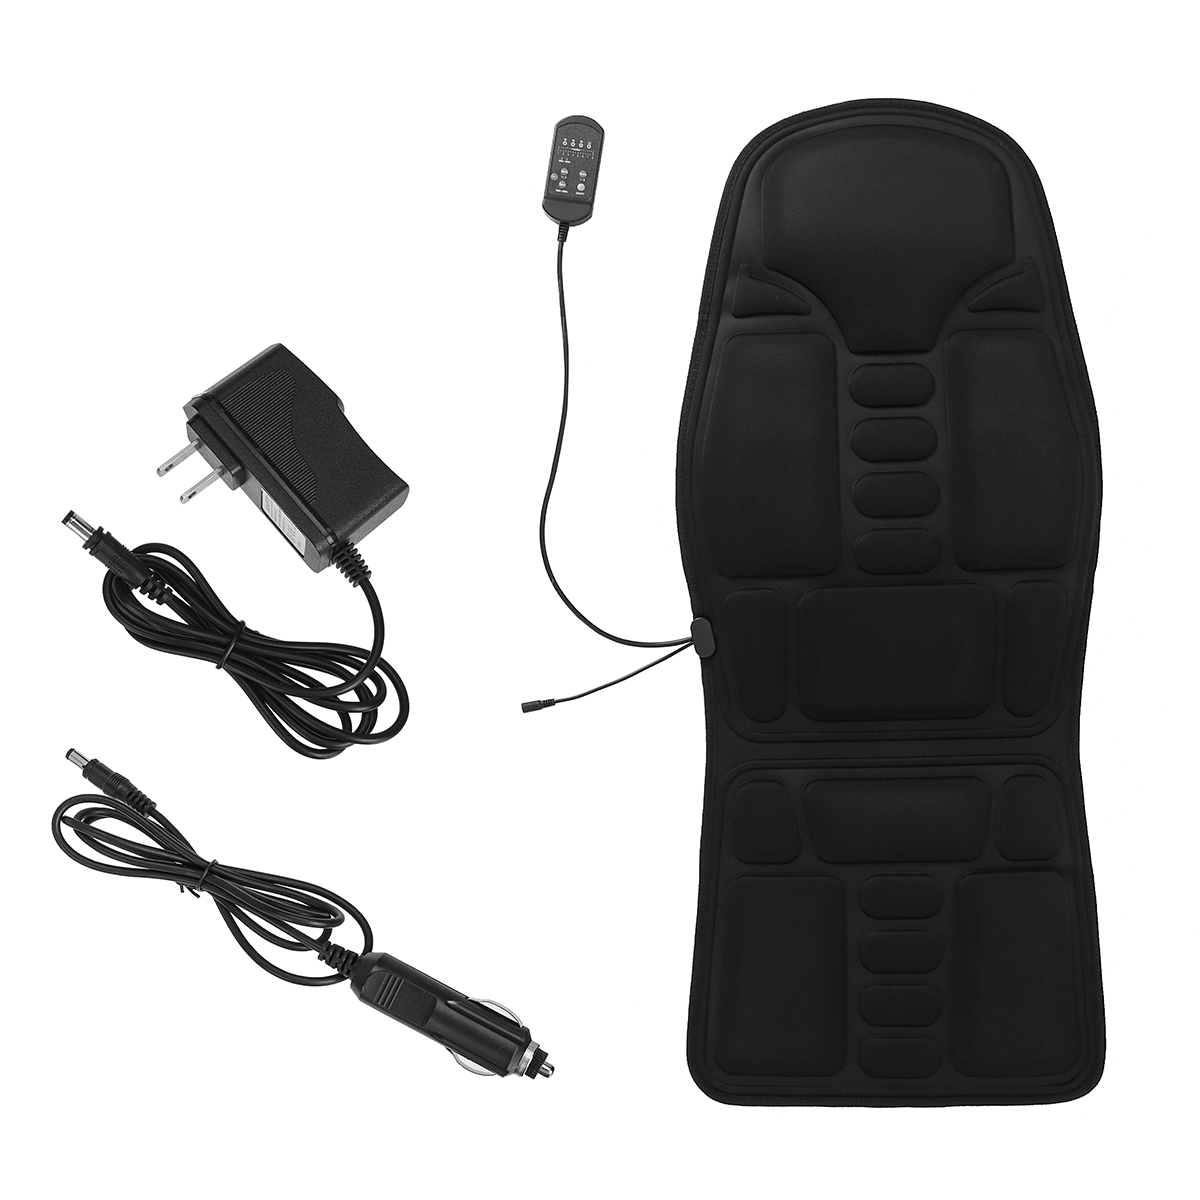 8 Modes Car Seat Heating Massage Cushion Home Office Chair Back Neck Waist Pad - Auto GoShop